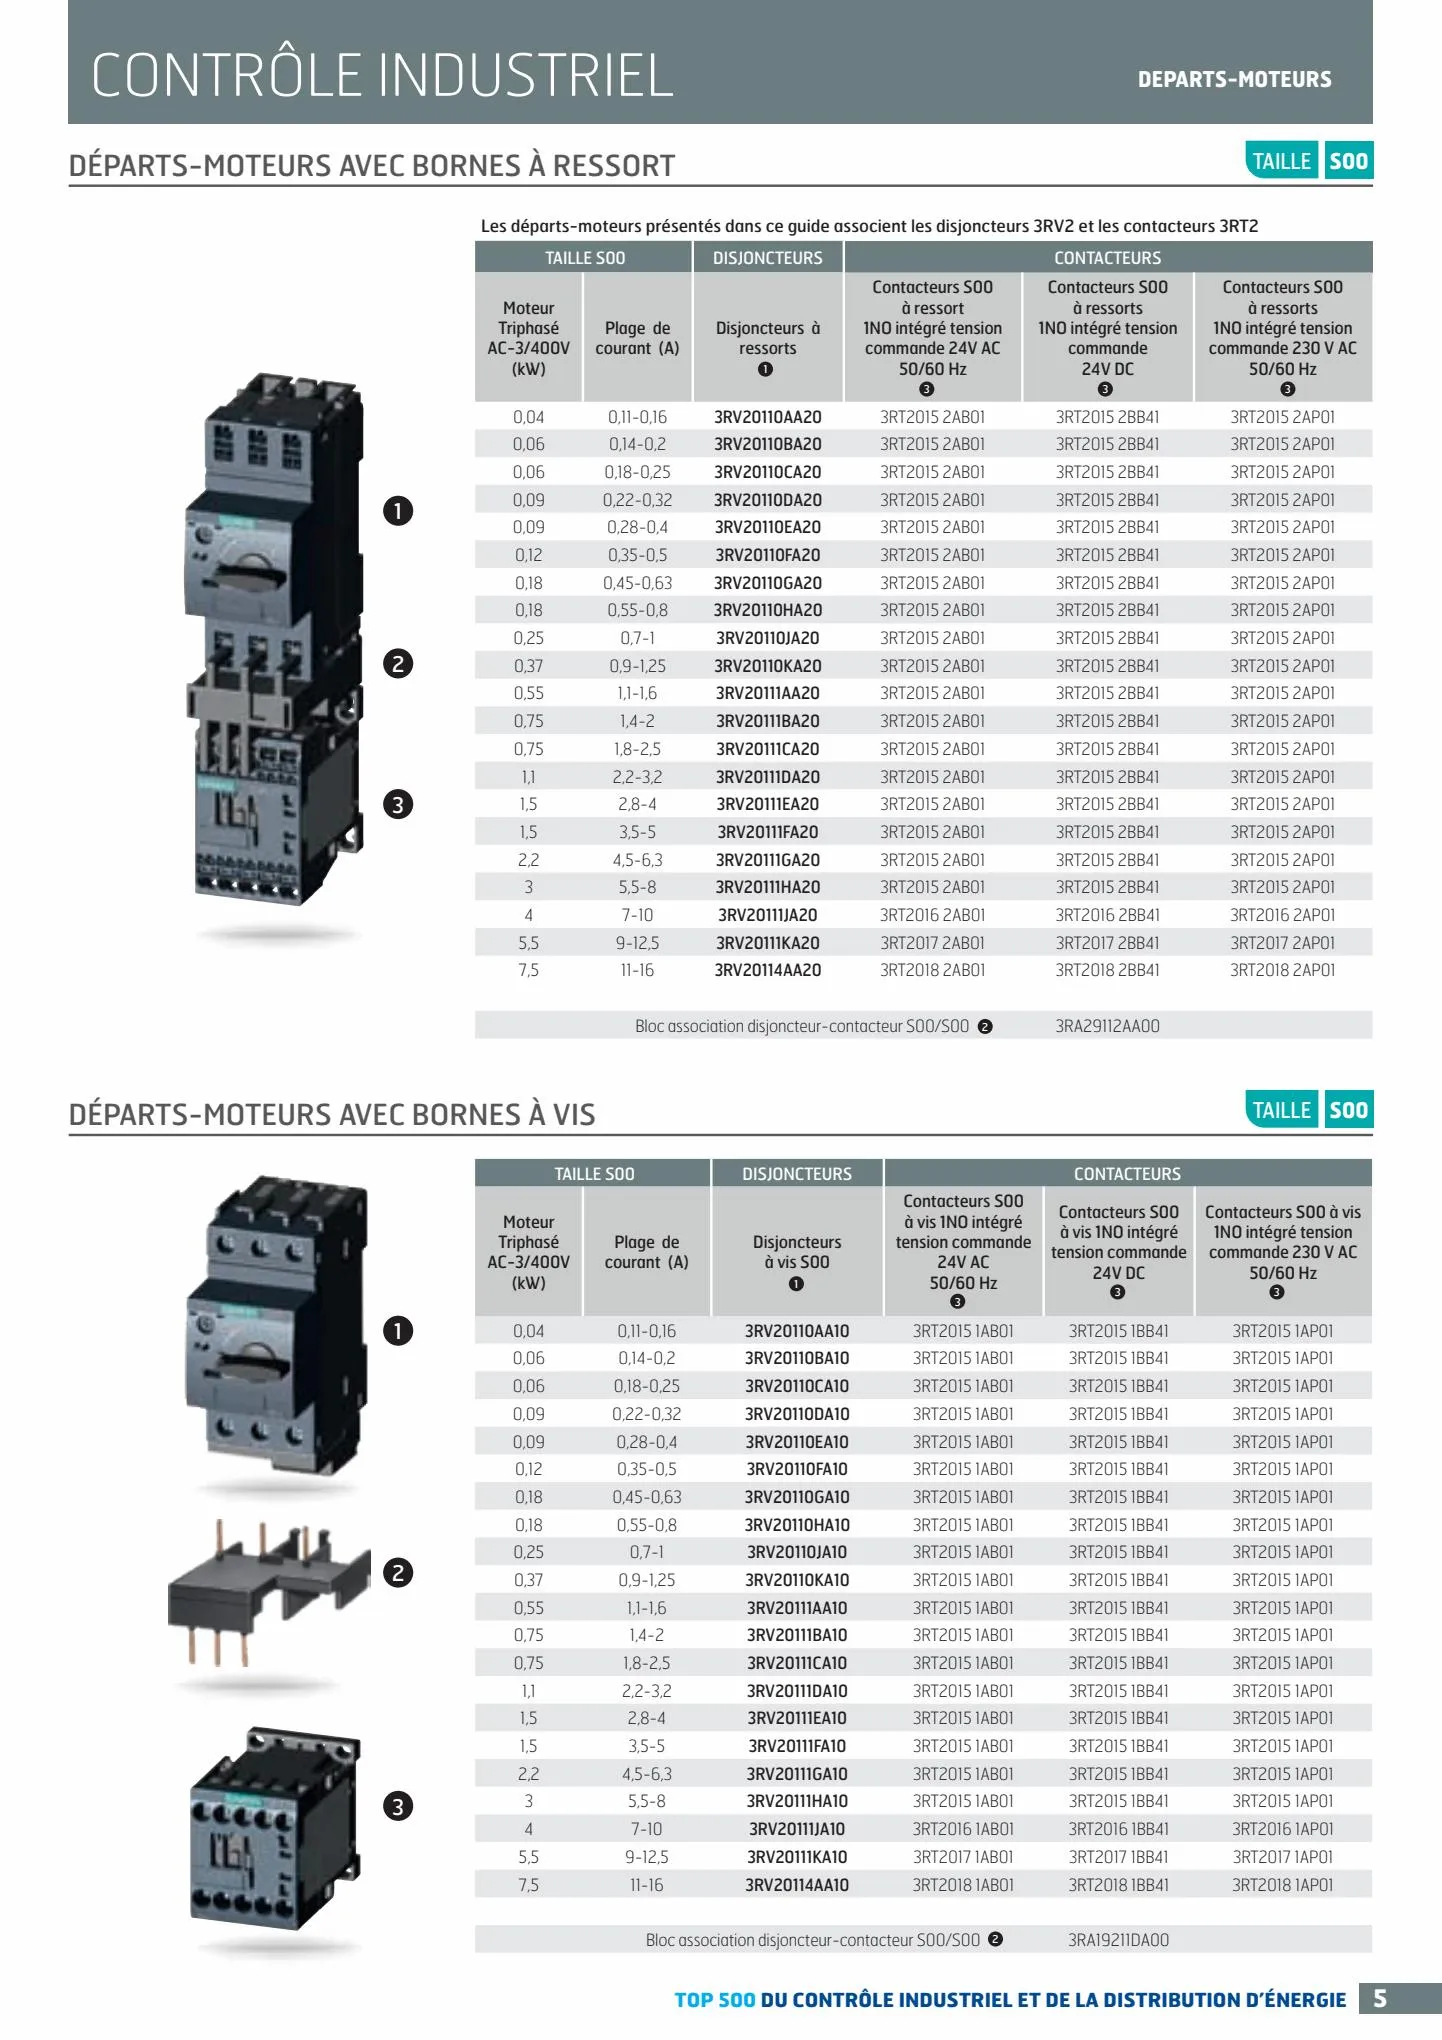 Catalogue TOP 500 siemens, page 00005